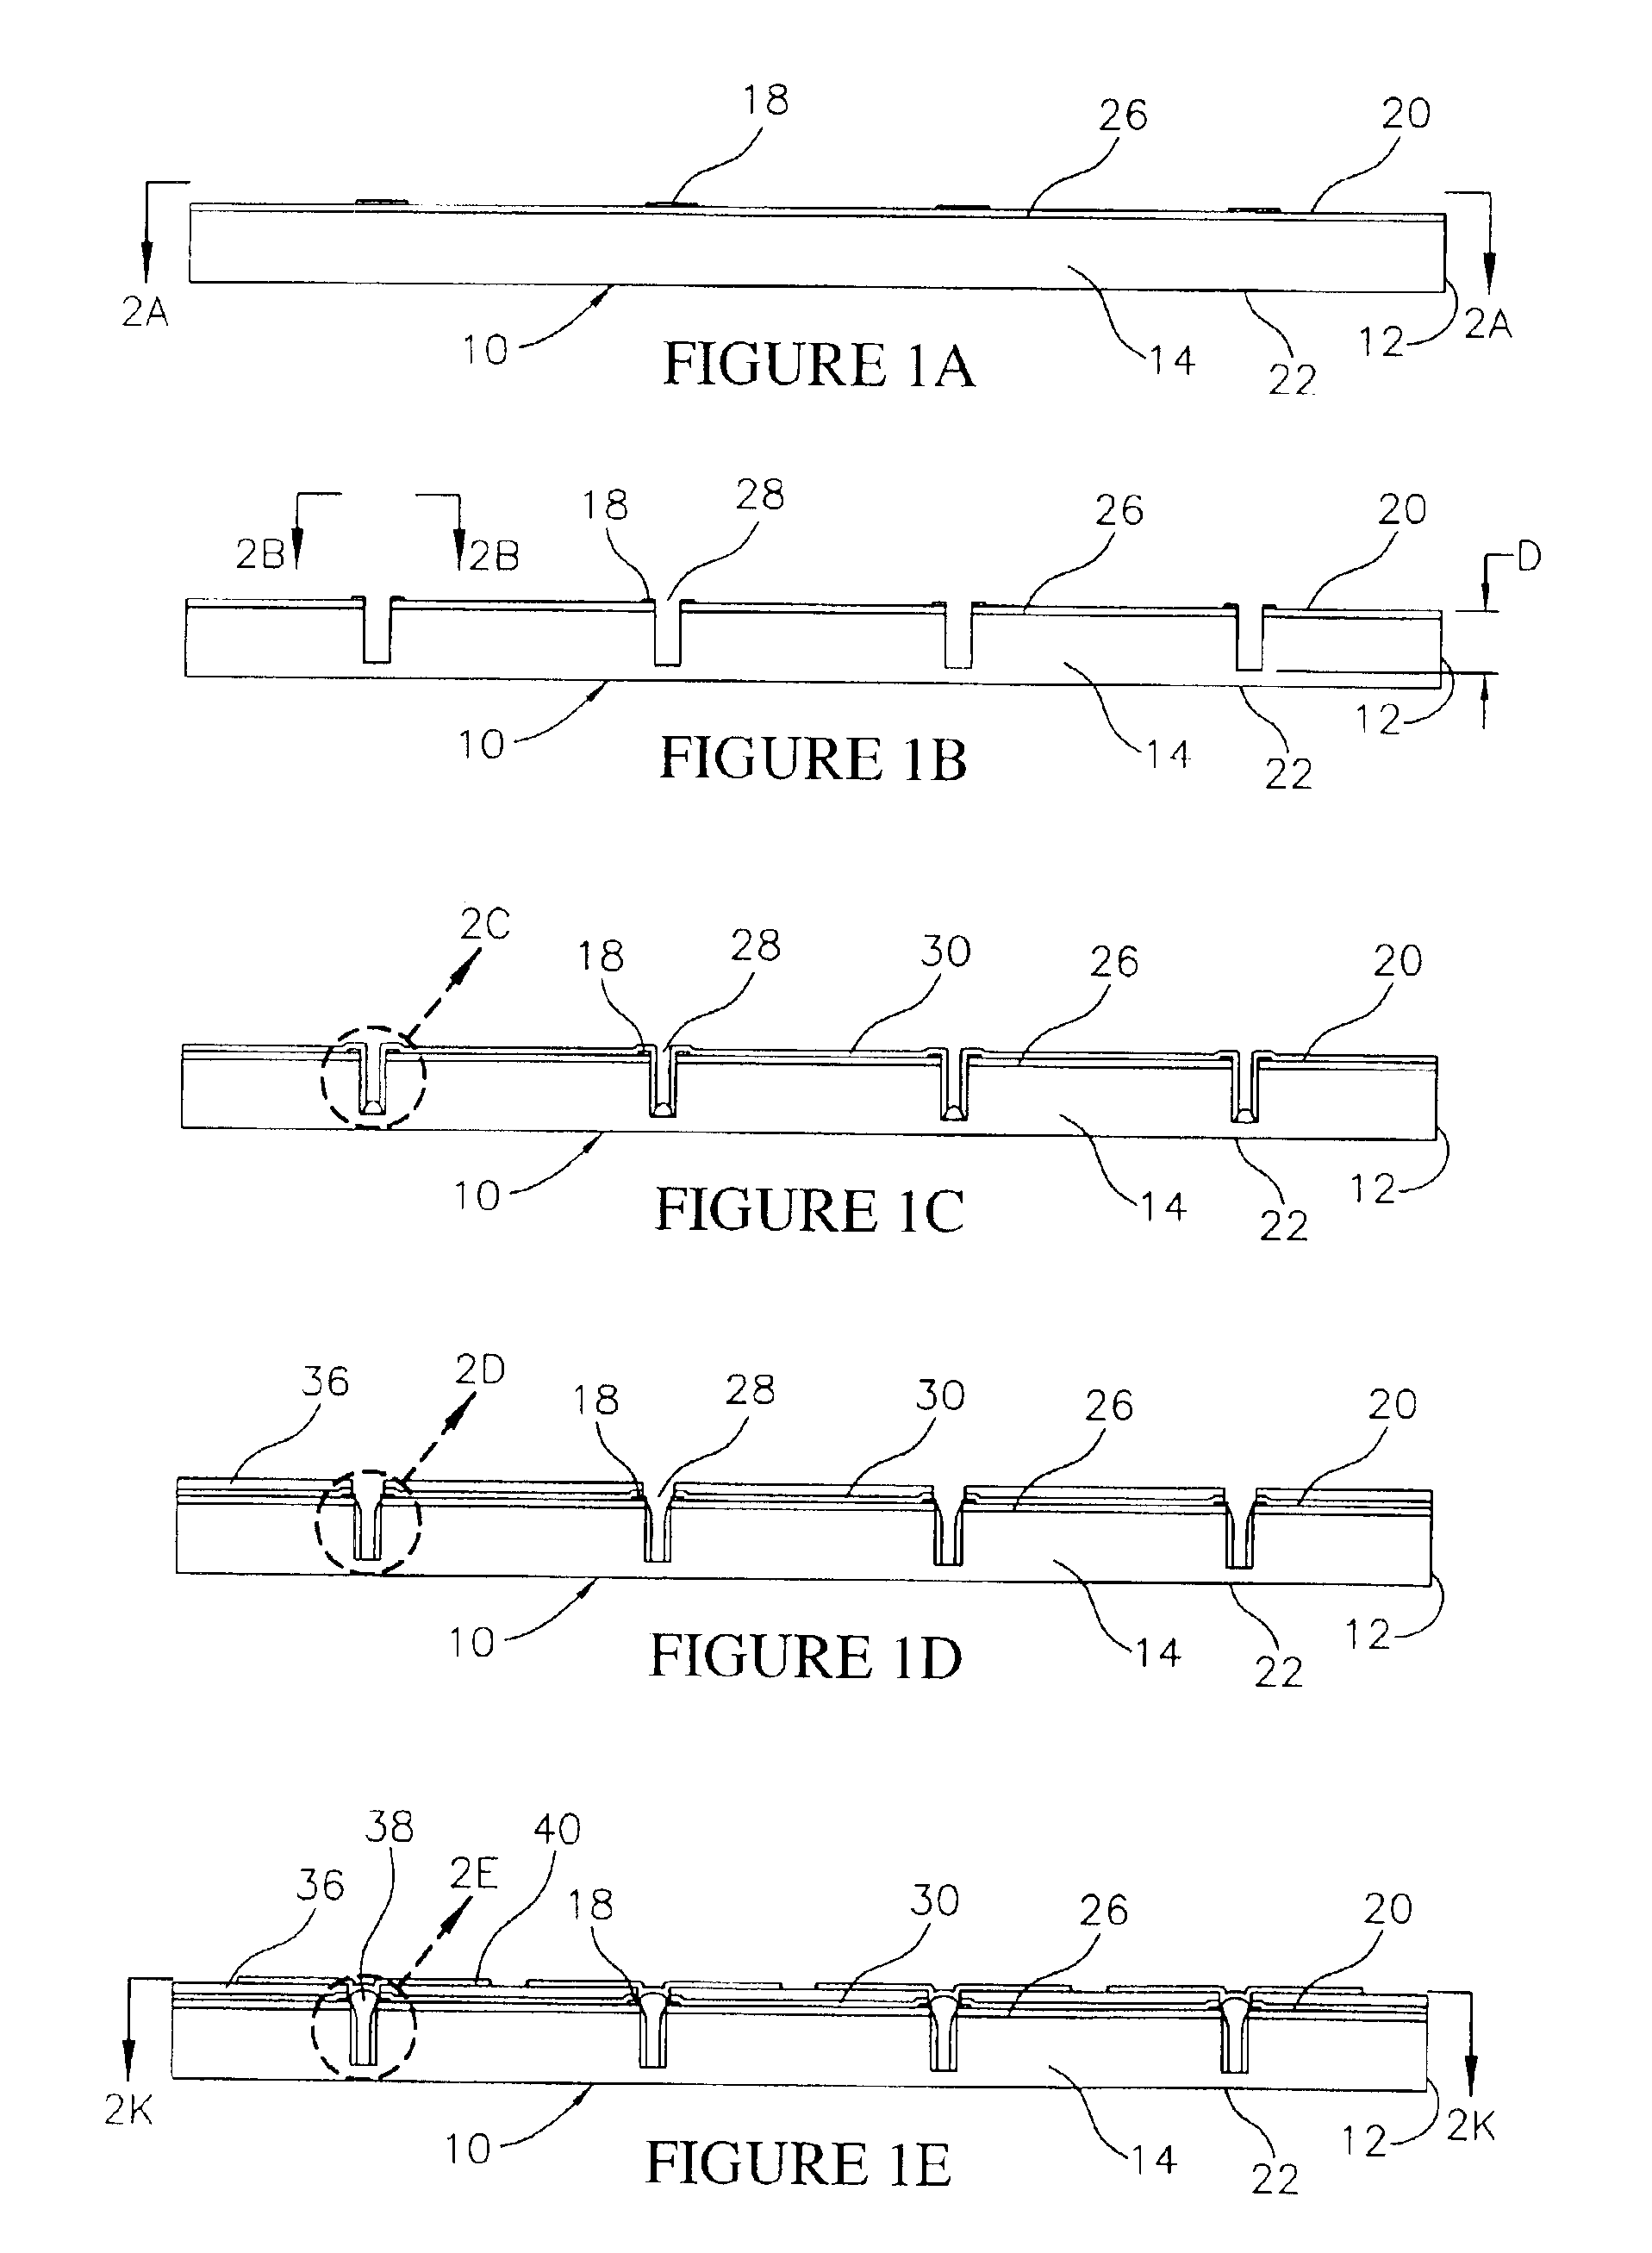 Semiconductor component having backside pin contacts